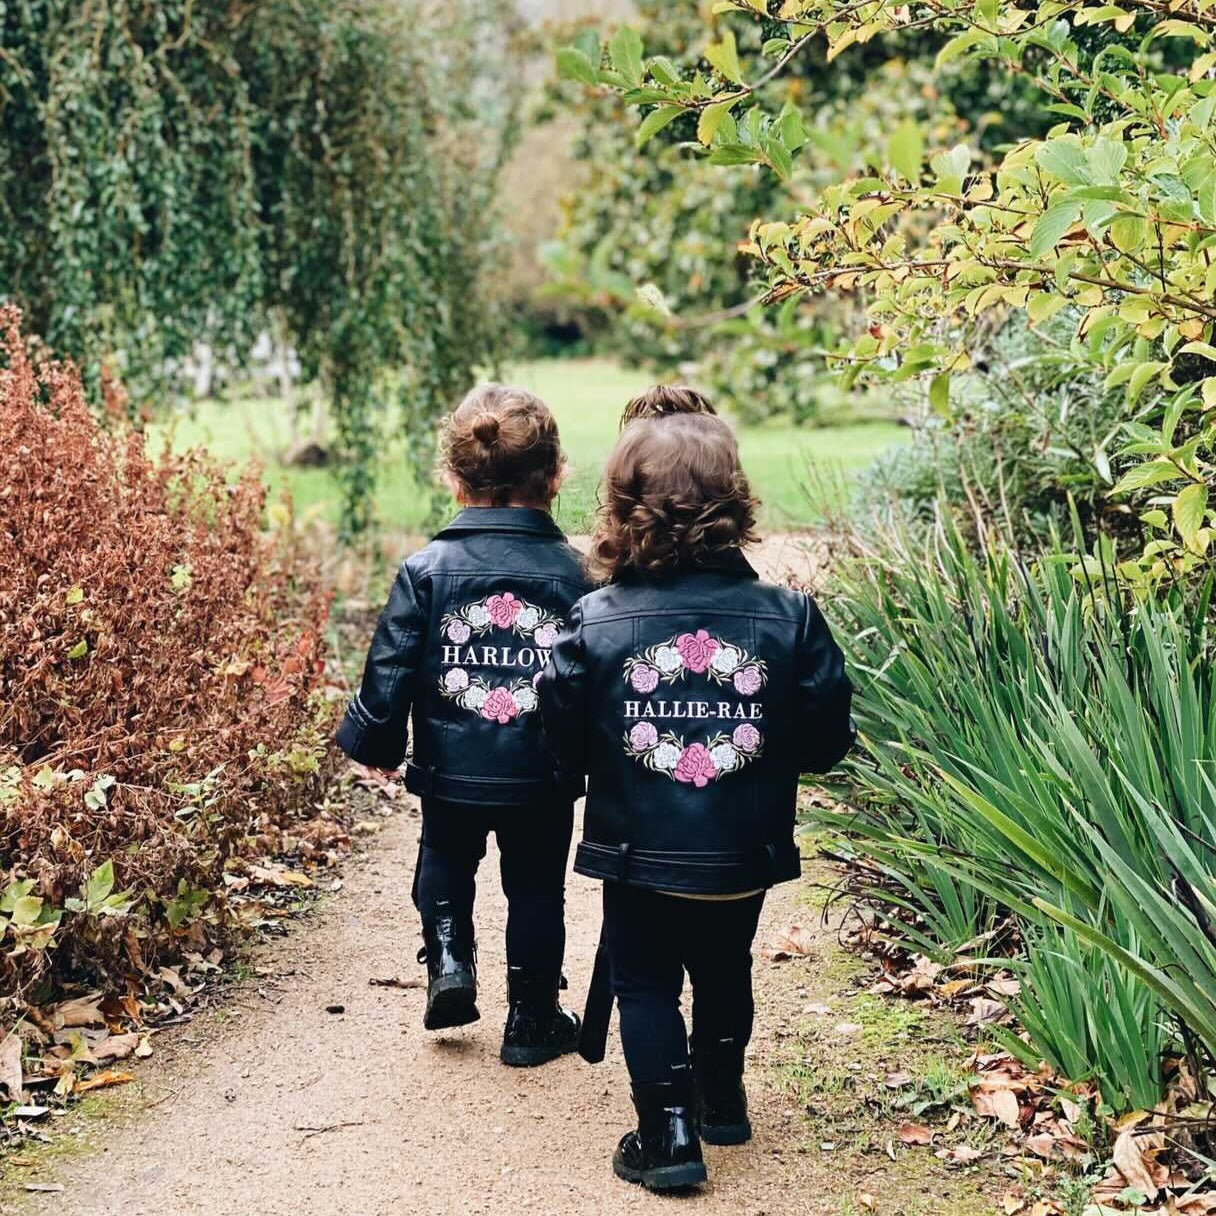 Floral Custom Name Wedding Jacket: Make your flower girl feel special with this unique, personalized kids jacket adorned with floral embroidery—a delightful and fashionable gift for the wedding